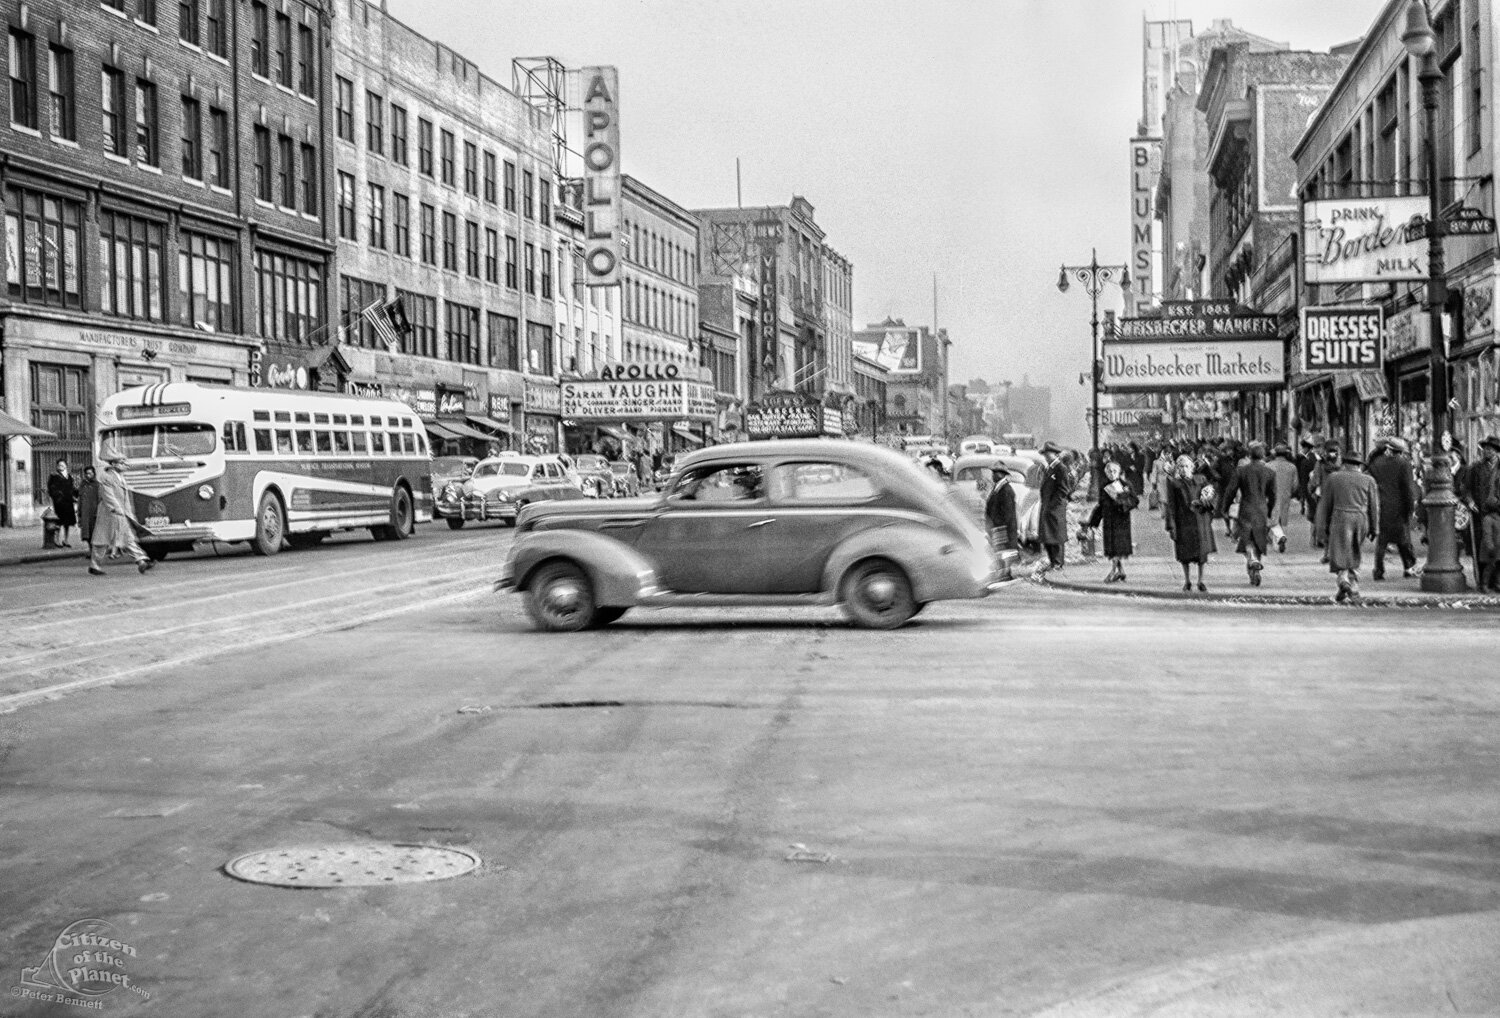 25th Street and 8th Ave, Apollo Theatre, Harlem, 1948